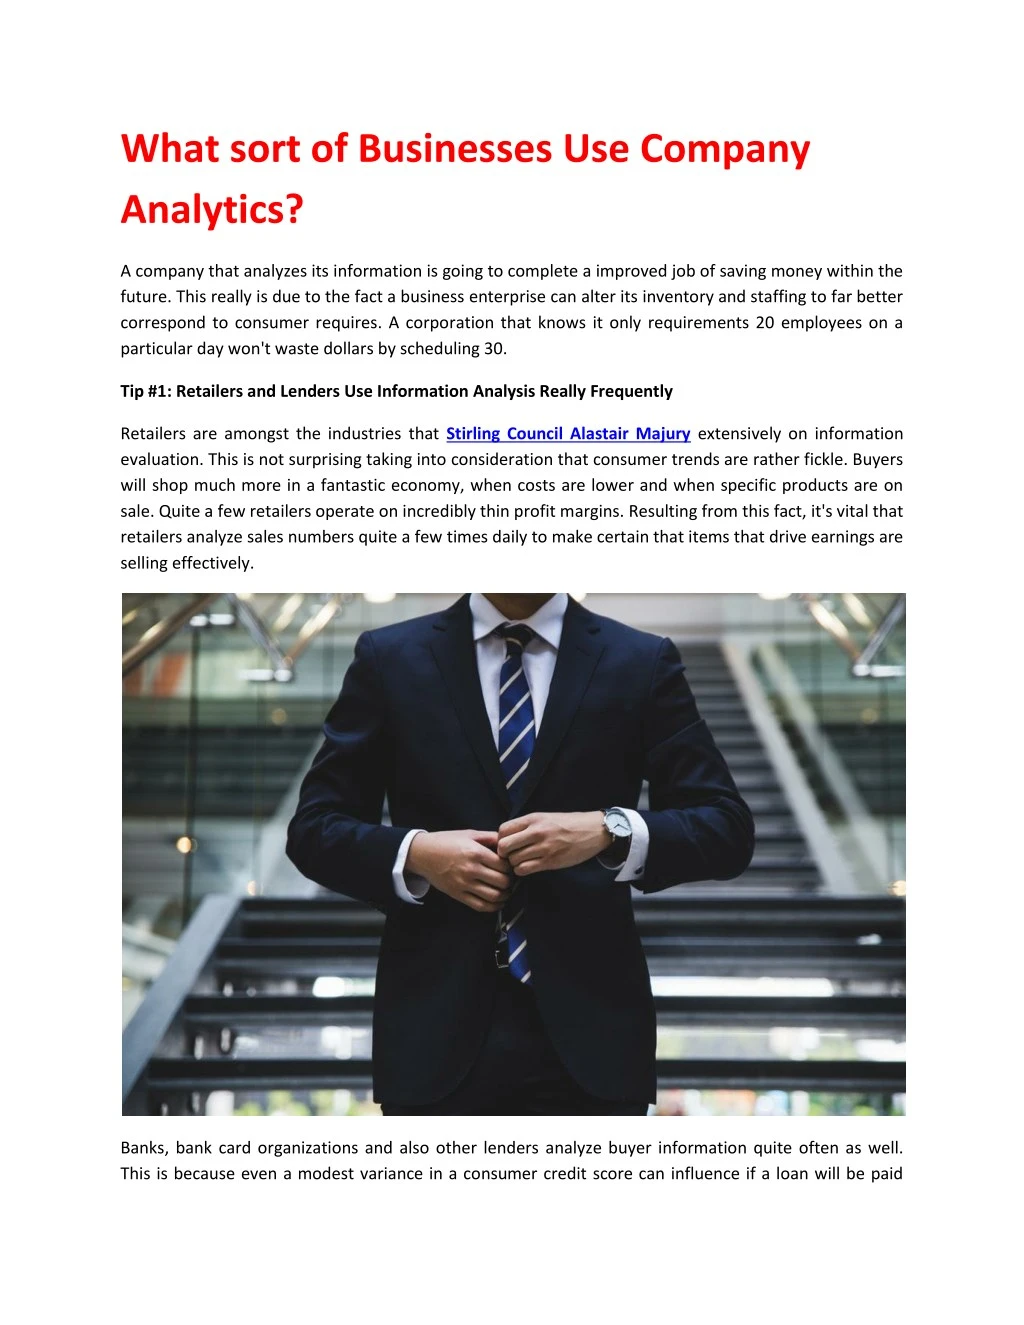 what sort of businesses use company analytics